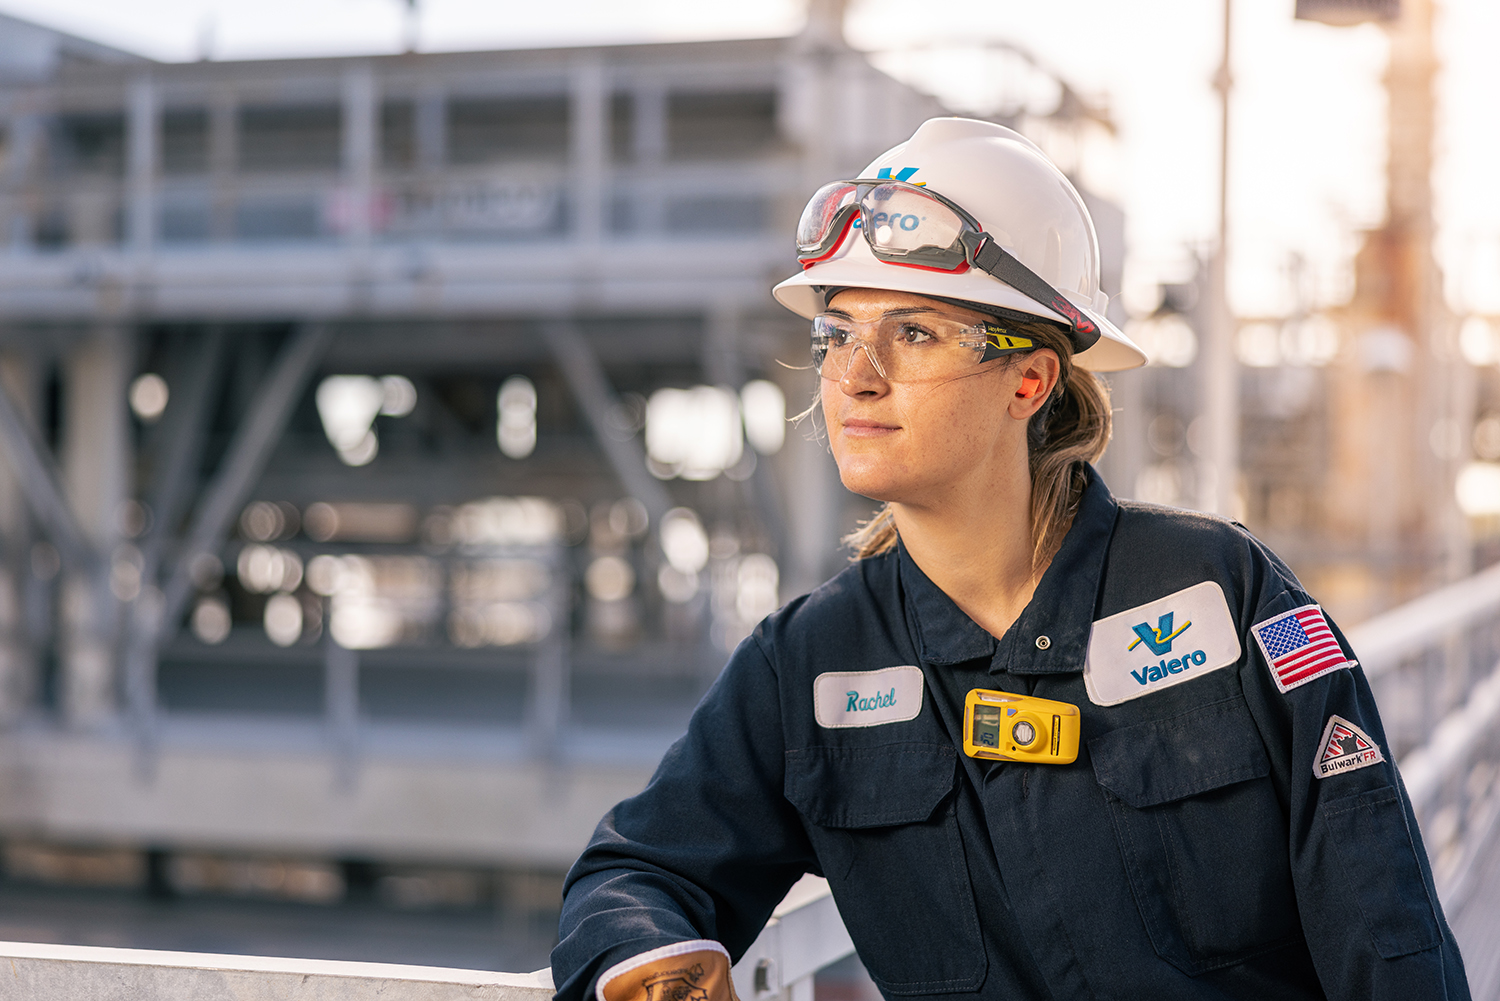 Valero Employee at the St. Charles Refinery